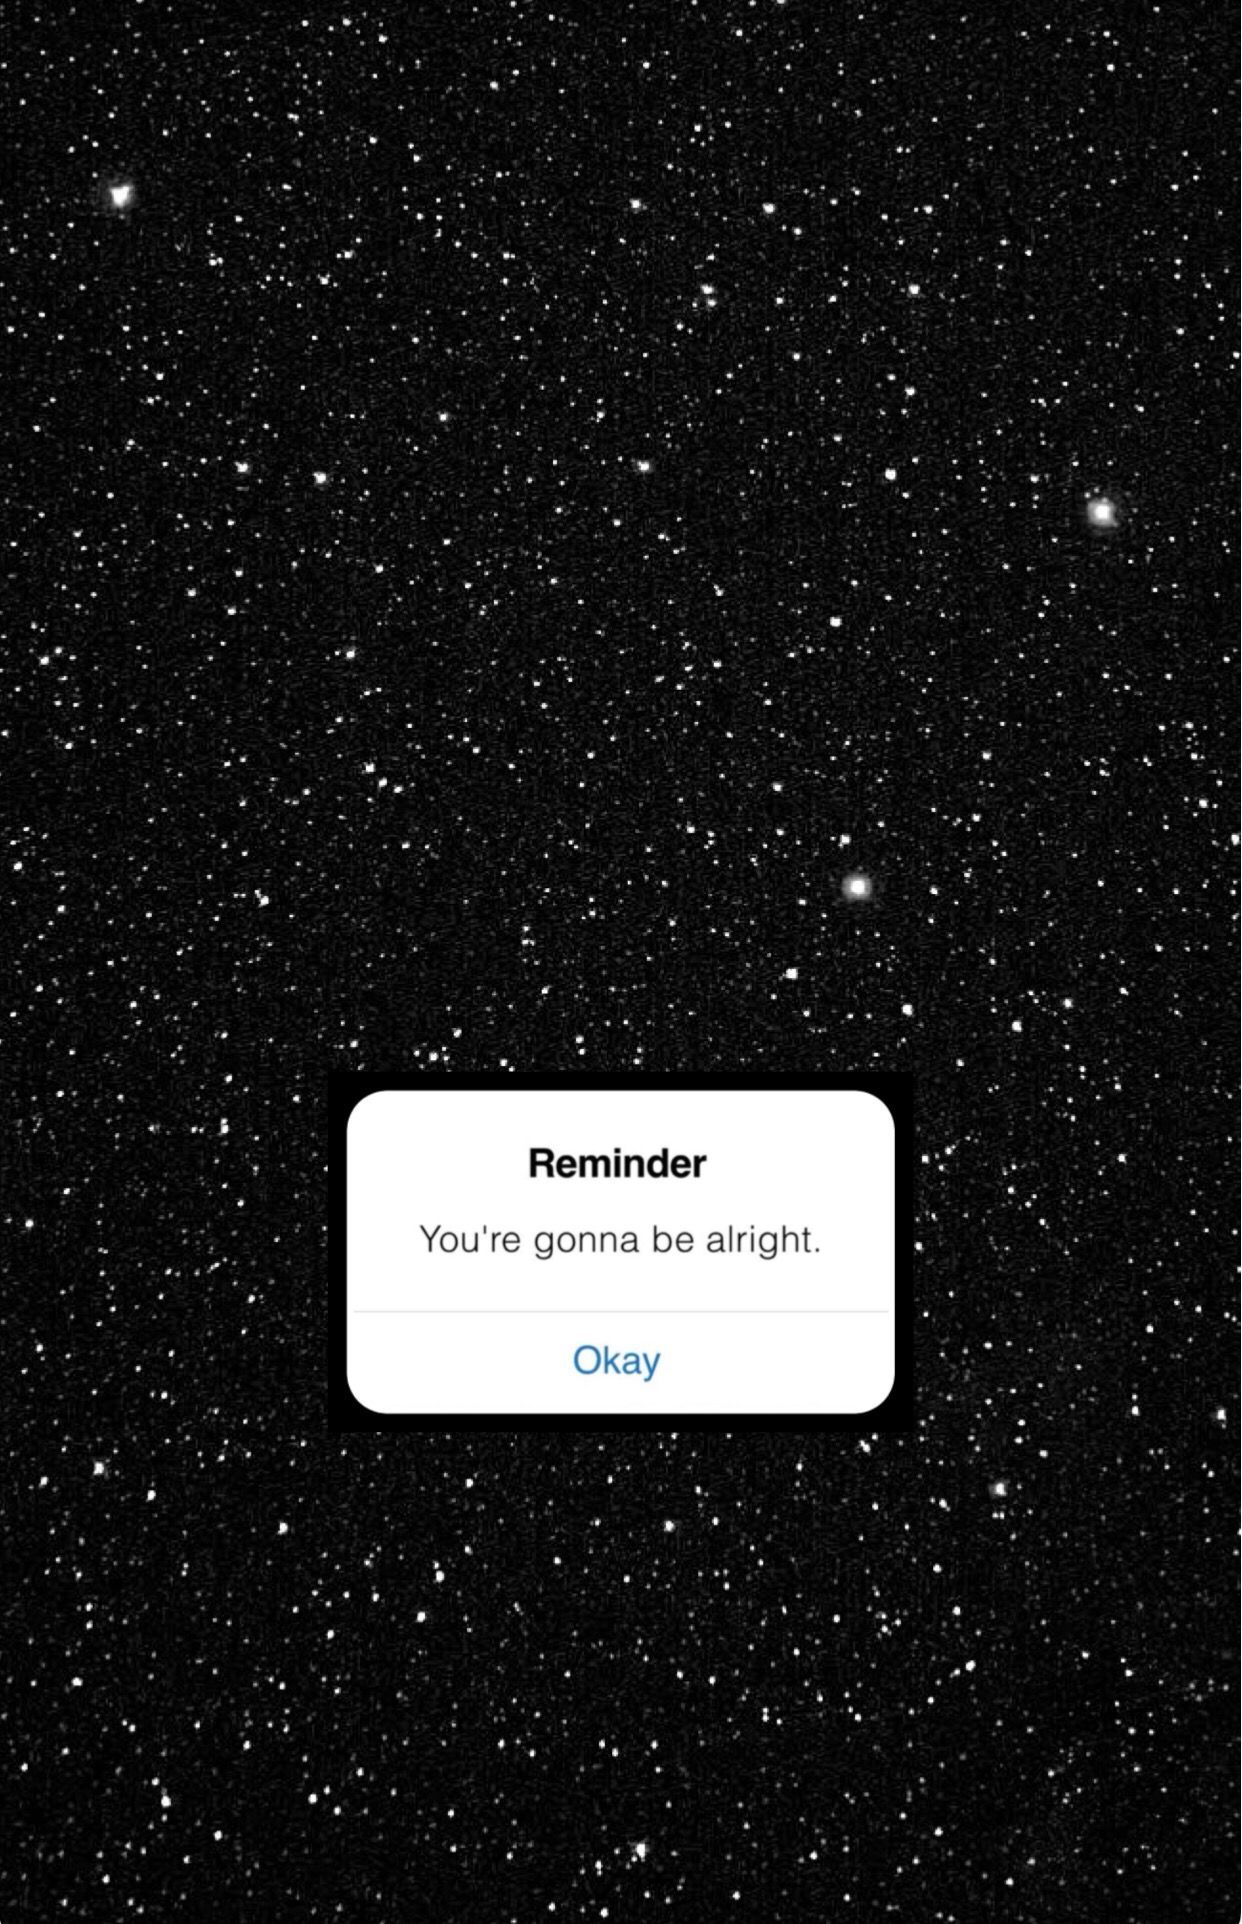 Wall paper sky and stars+ reminder you're gonna be alright⭐️. Gonna be alright, Reminder, Alright